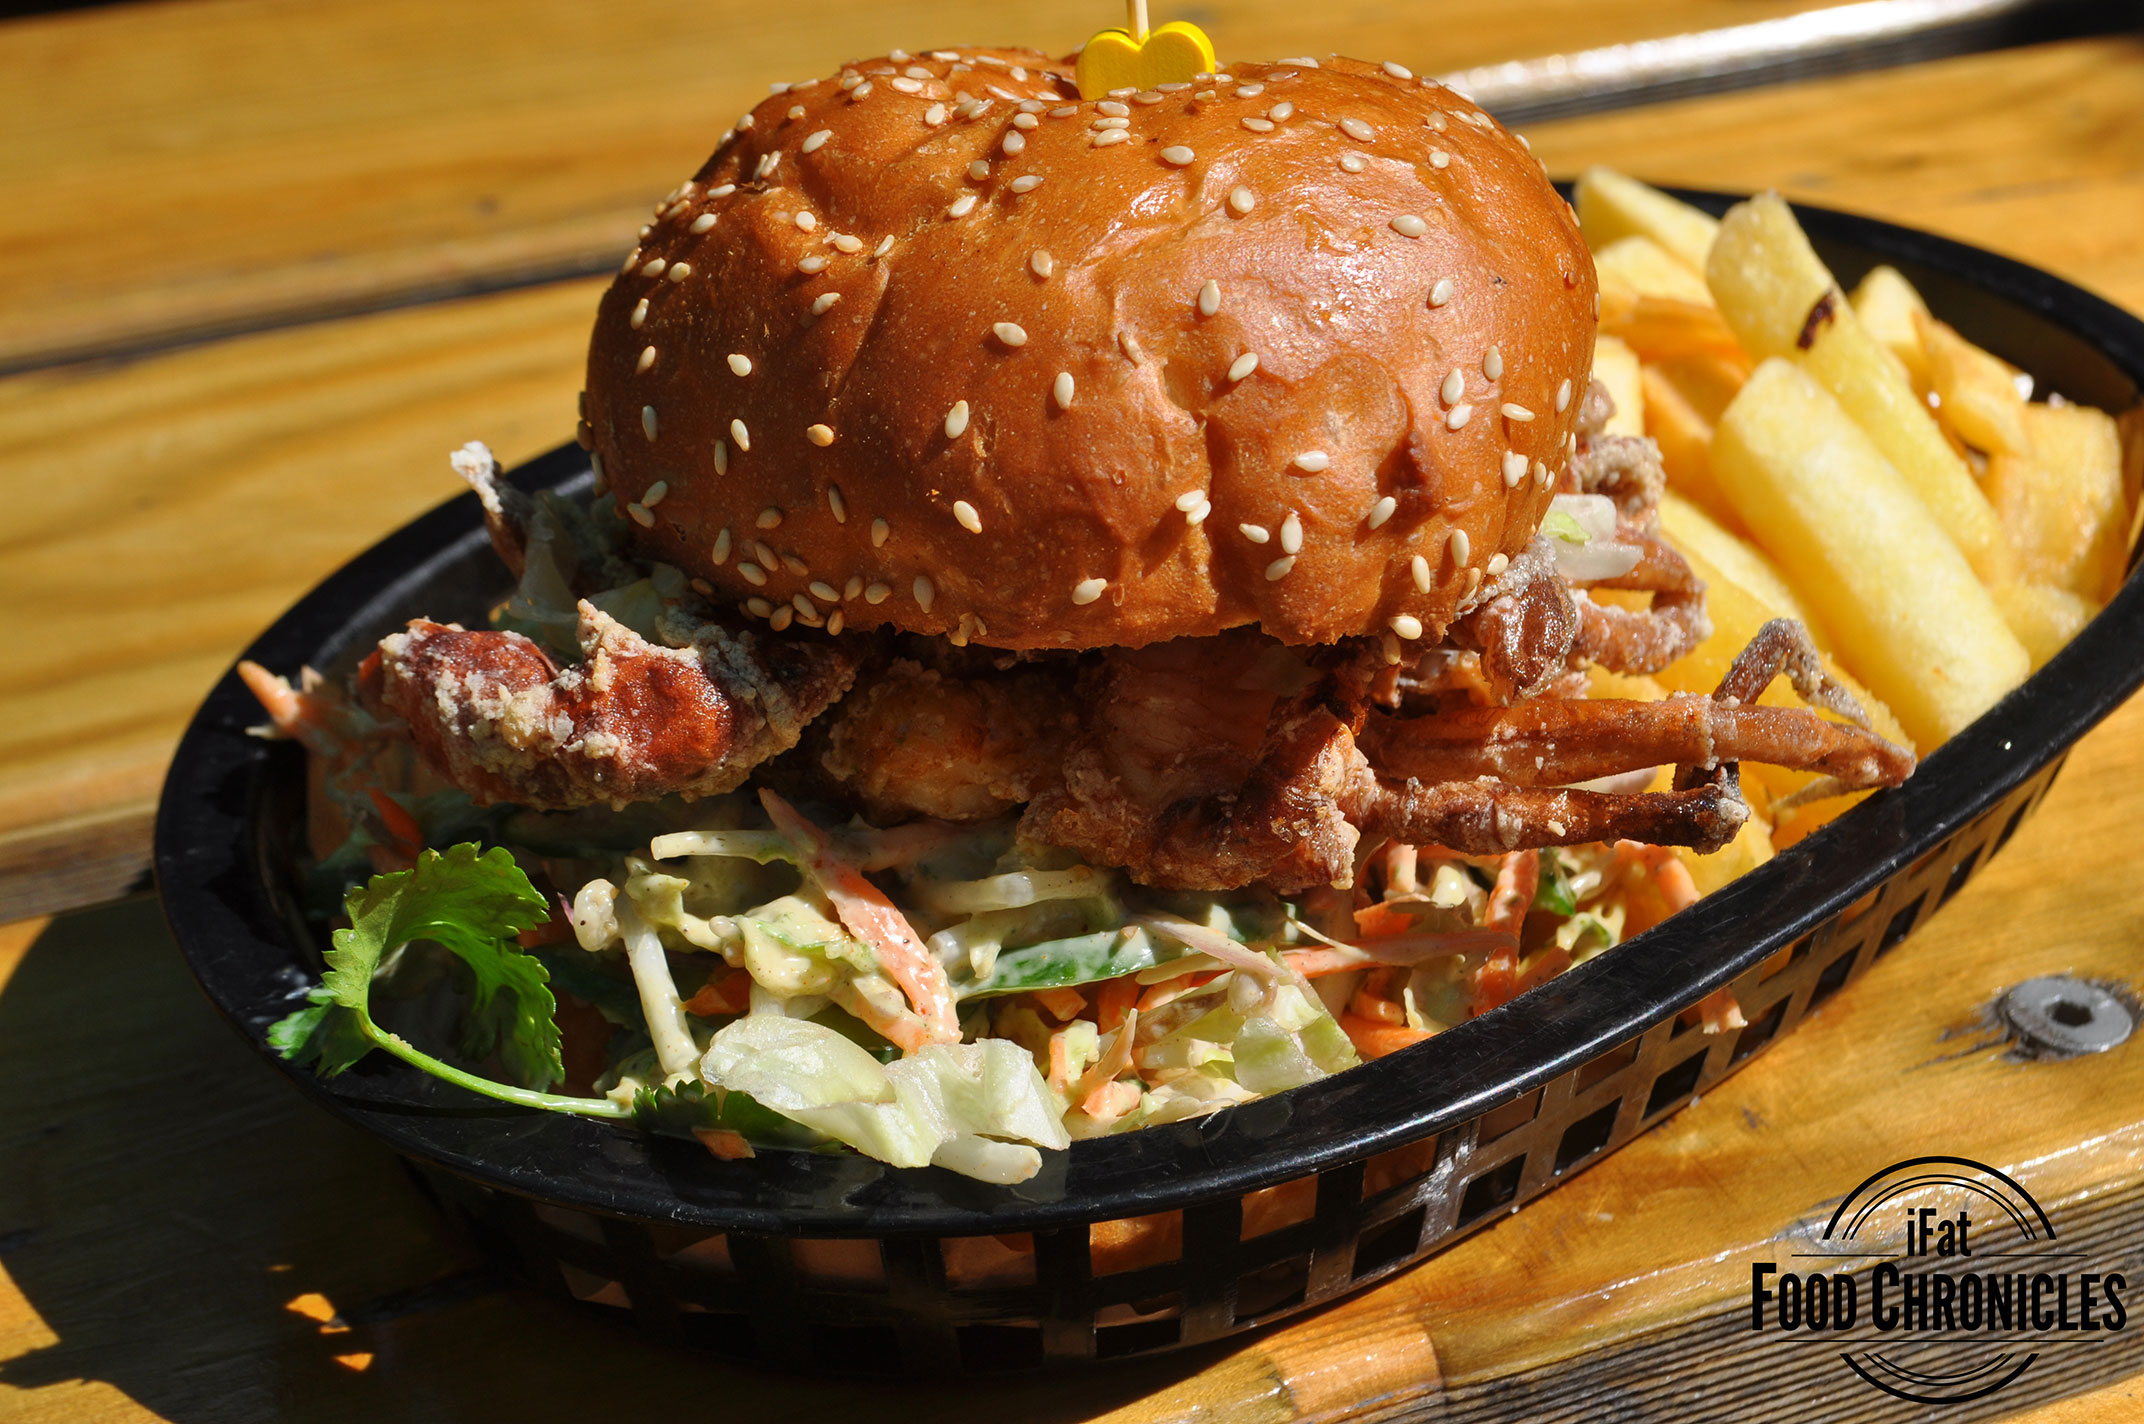 Soft shell crab burger with old bay coleslaw, ice-berg, sriarcha & chips